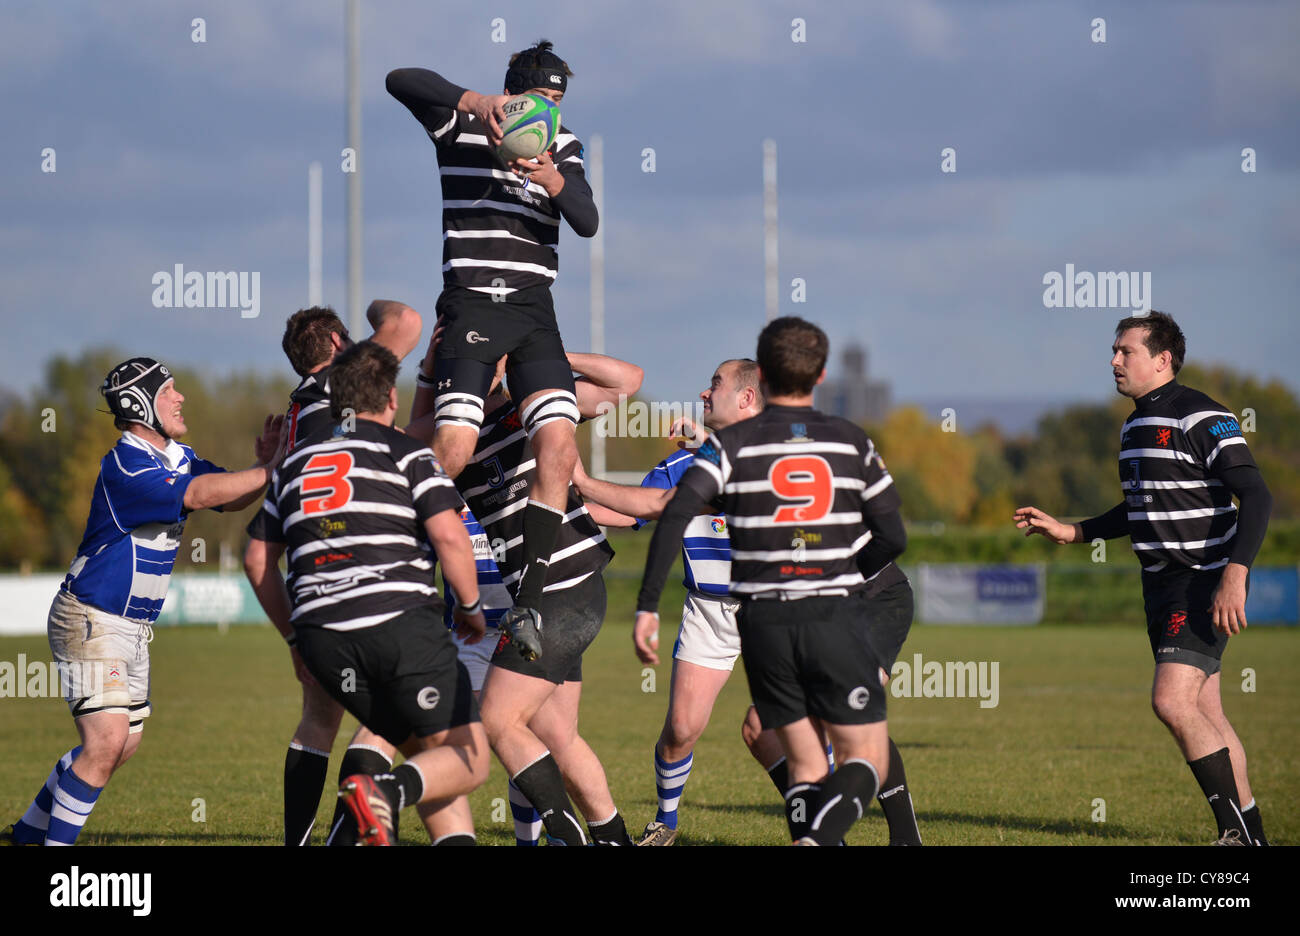 player catches the ball at a line-out  from a rugby match between Broughton Park andTyldesley Stock Photo